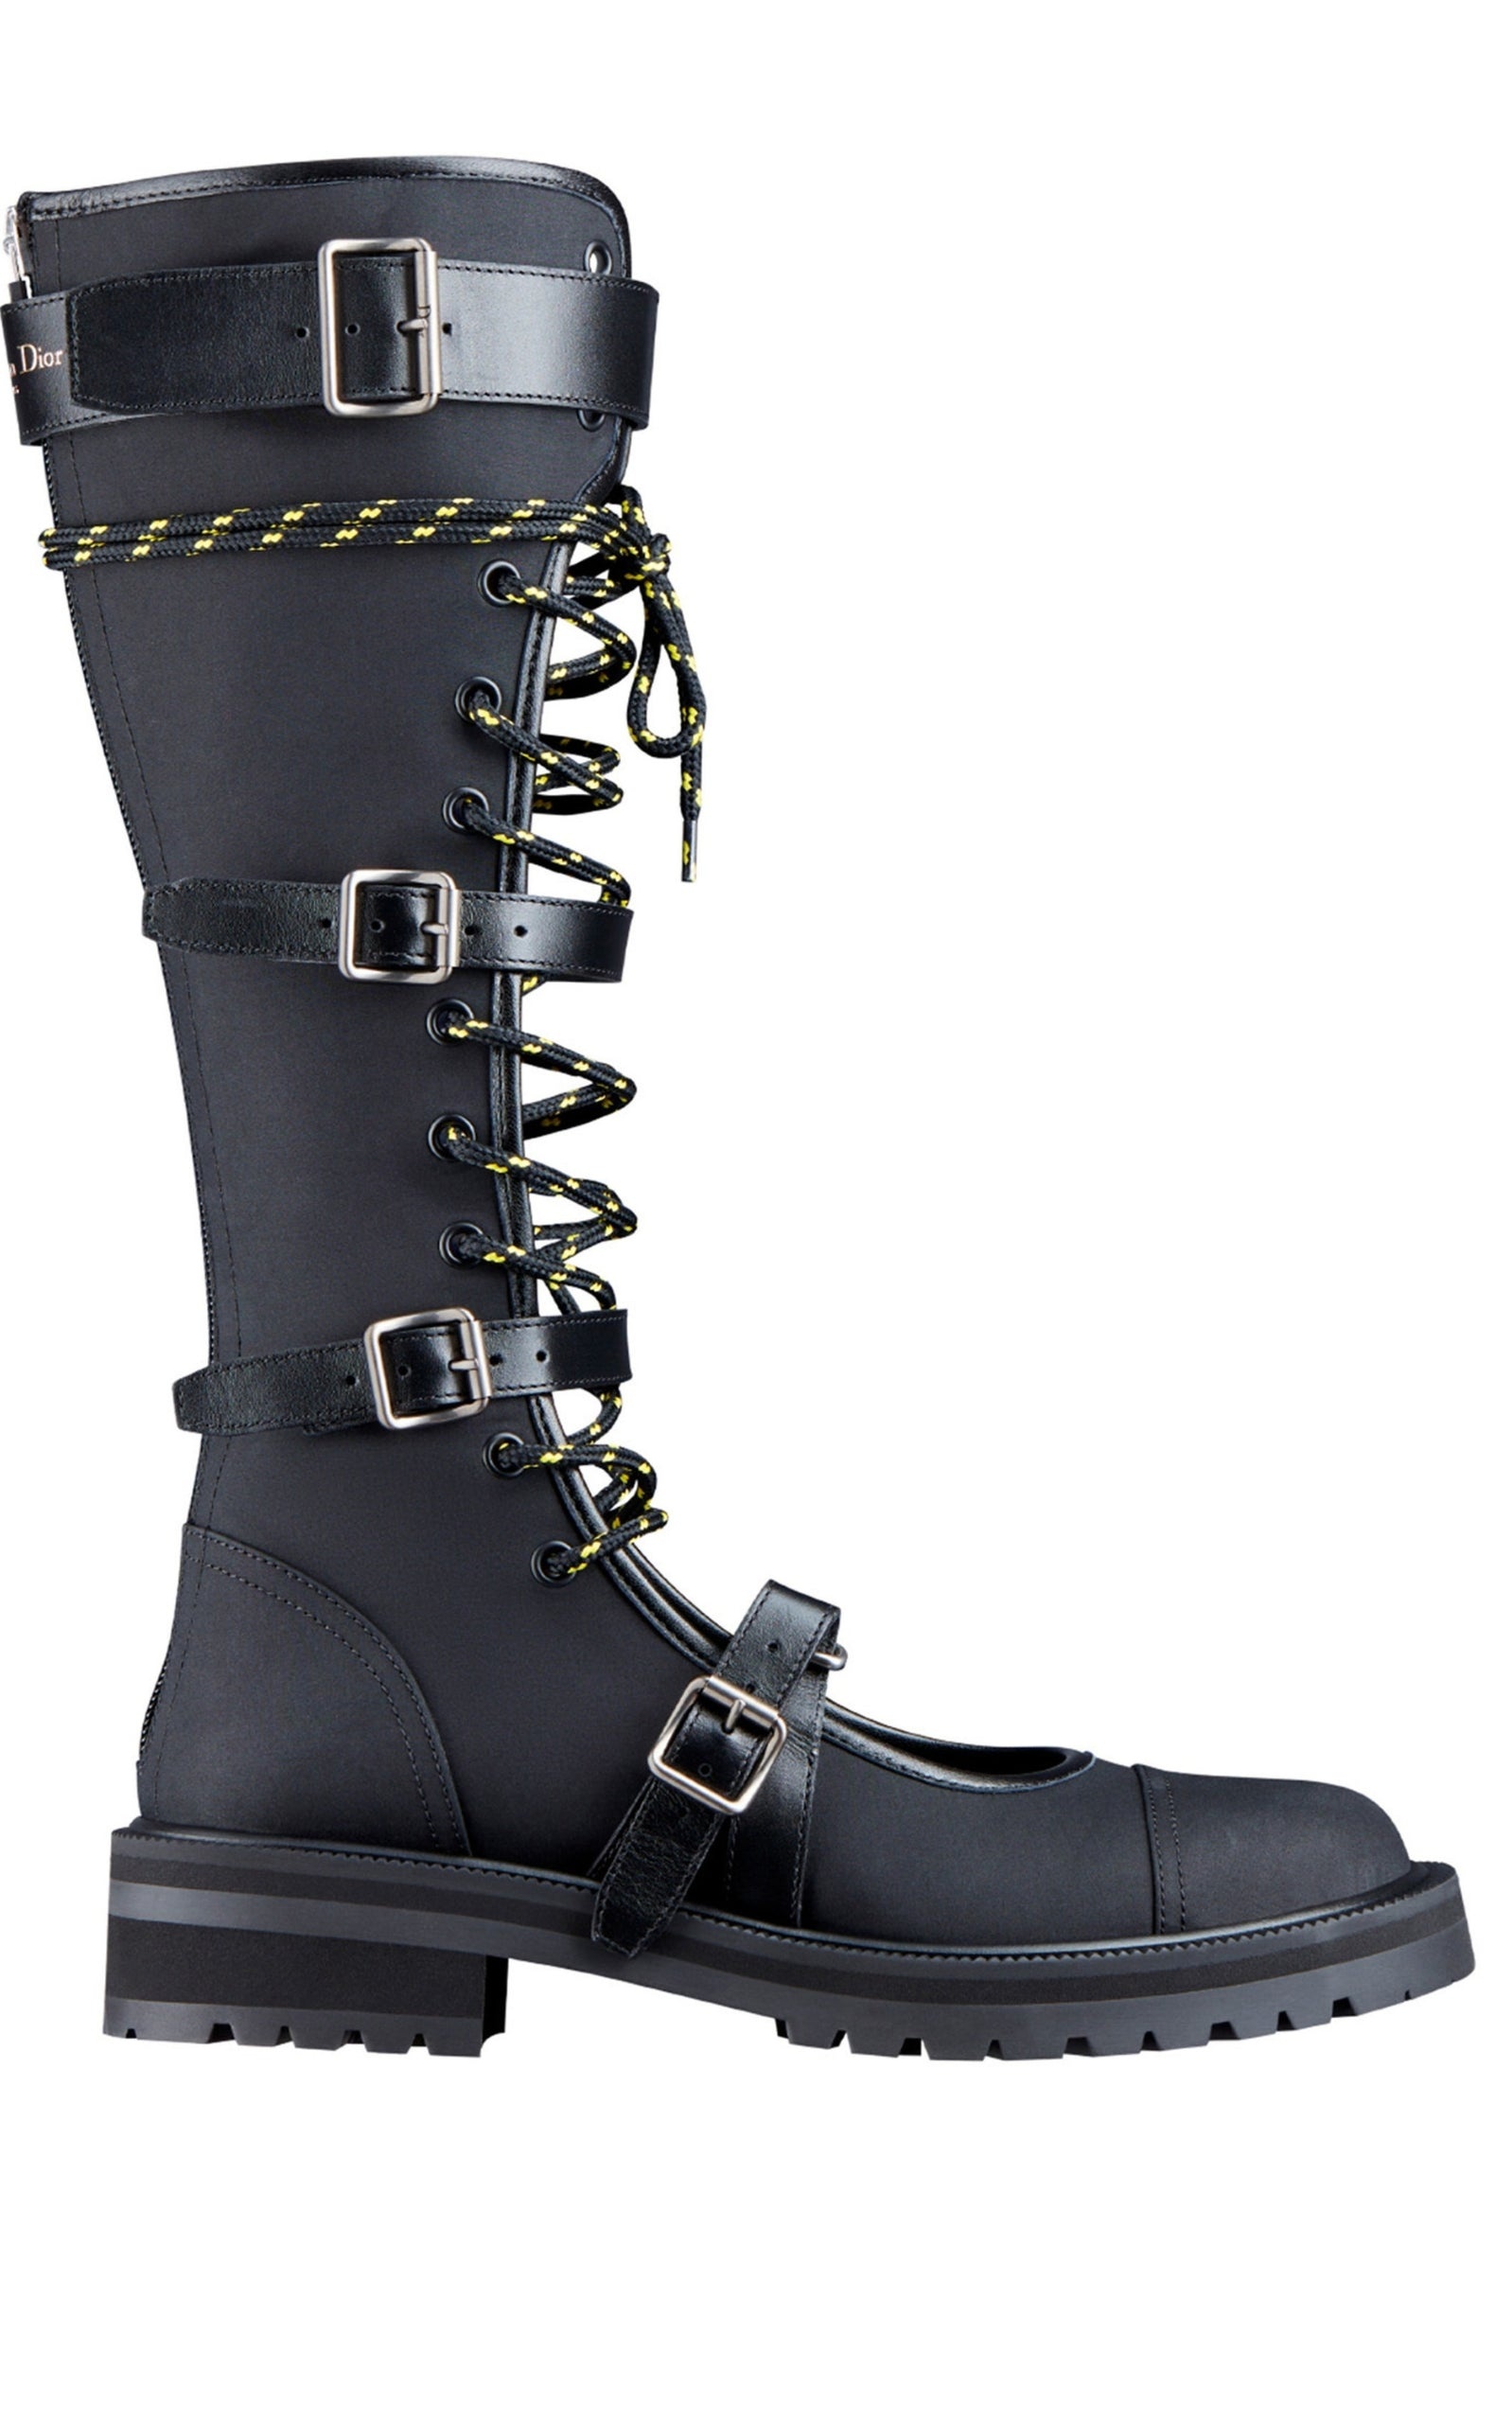 Dioranger Boots in Black Technical Fabric - 1